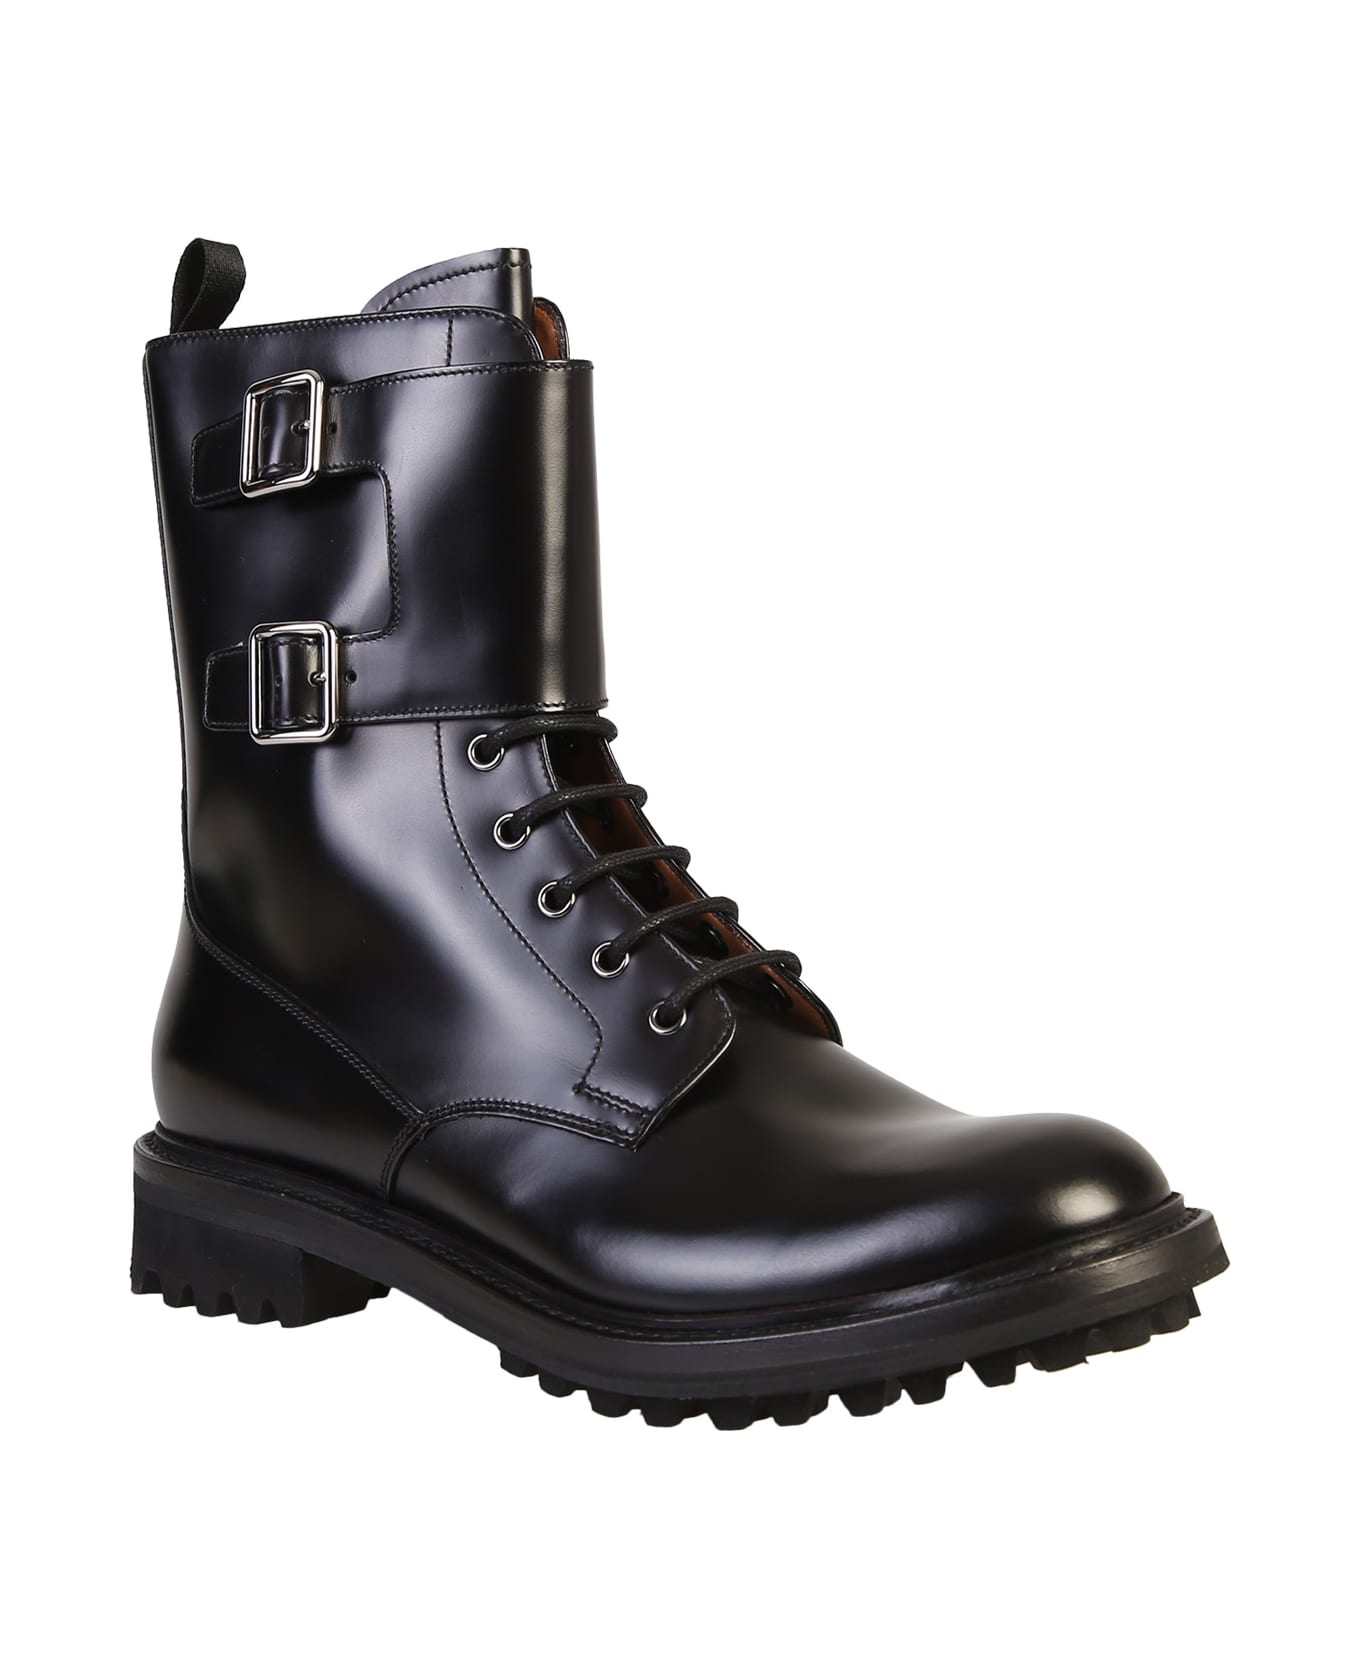 Church's Lace Up Boots - Black